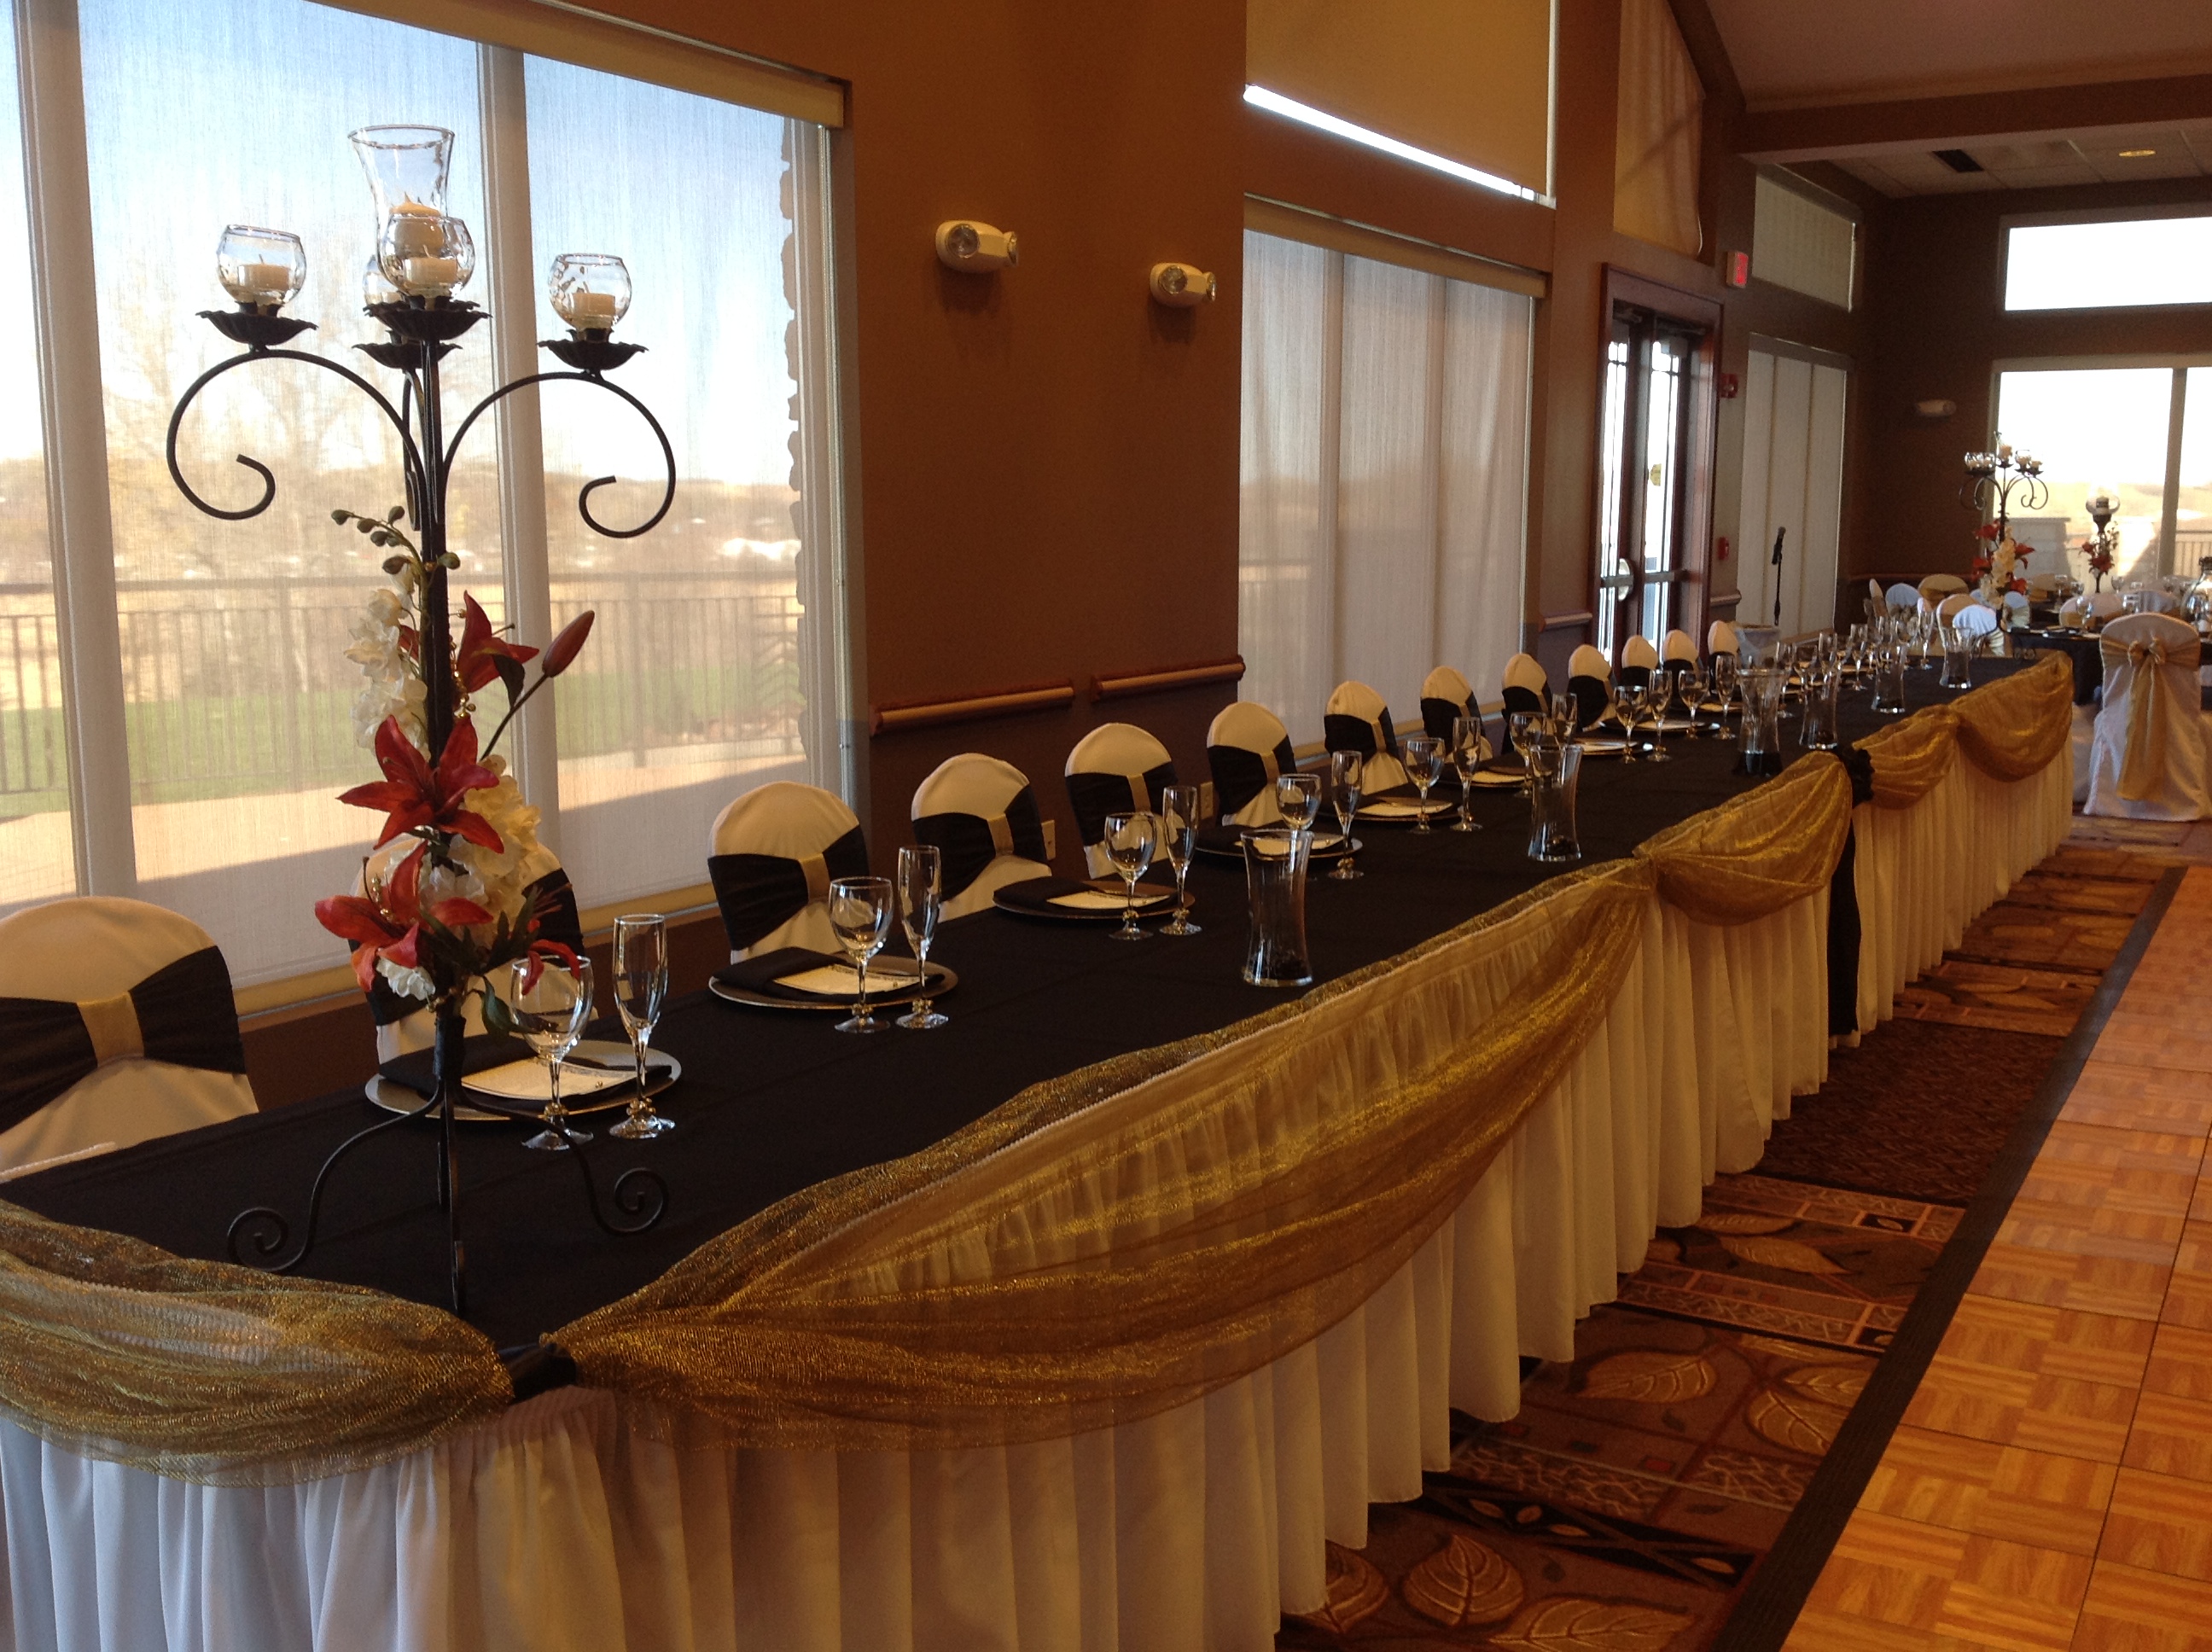 Wedding reception head table with black and gold decorations